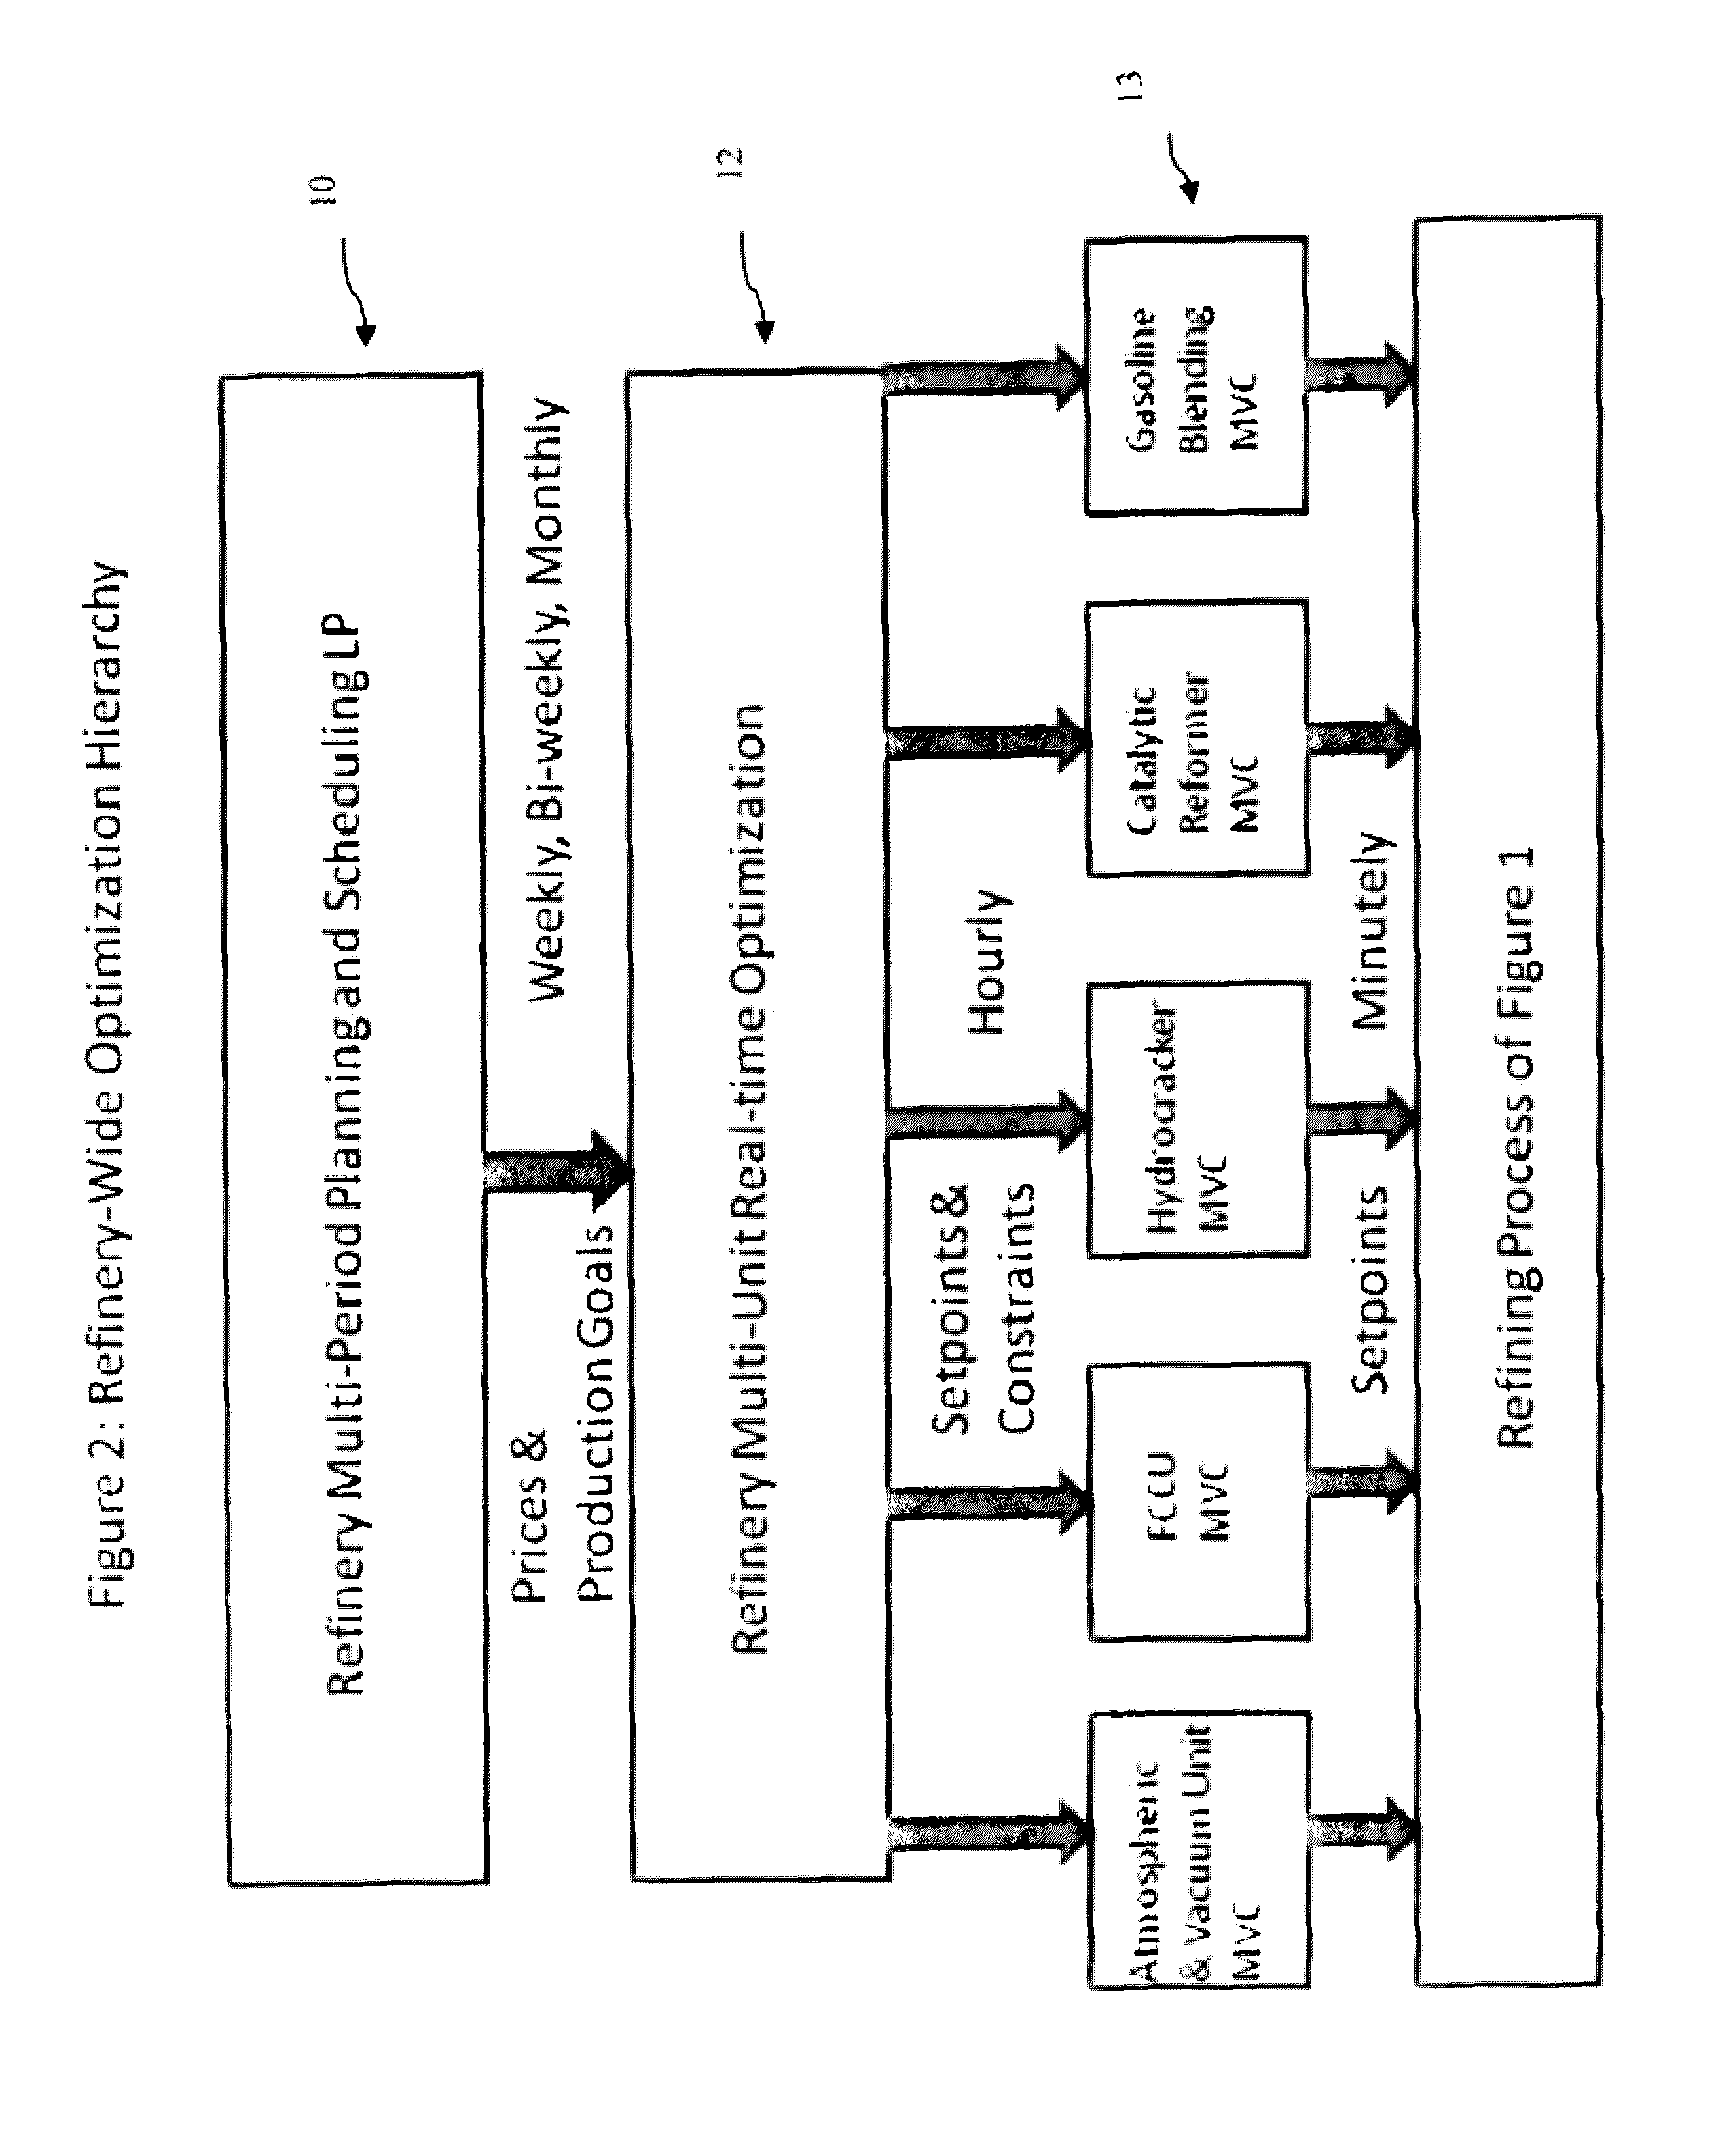 Computer apparatus and method for real-time multi-unit optimization